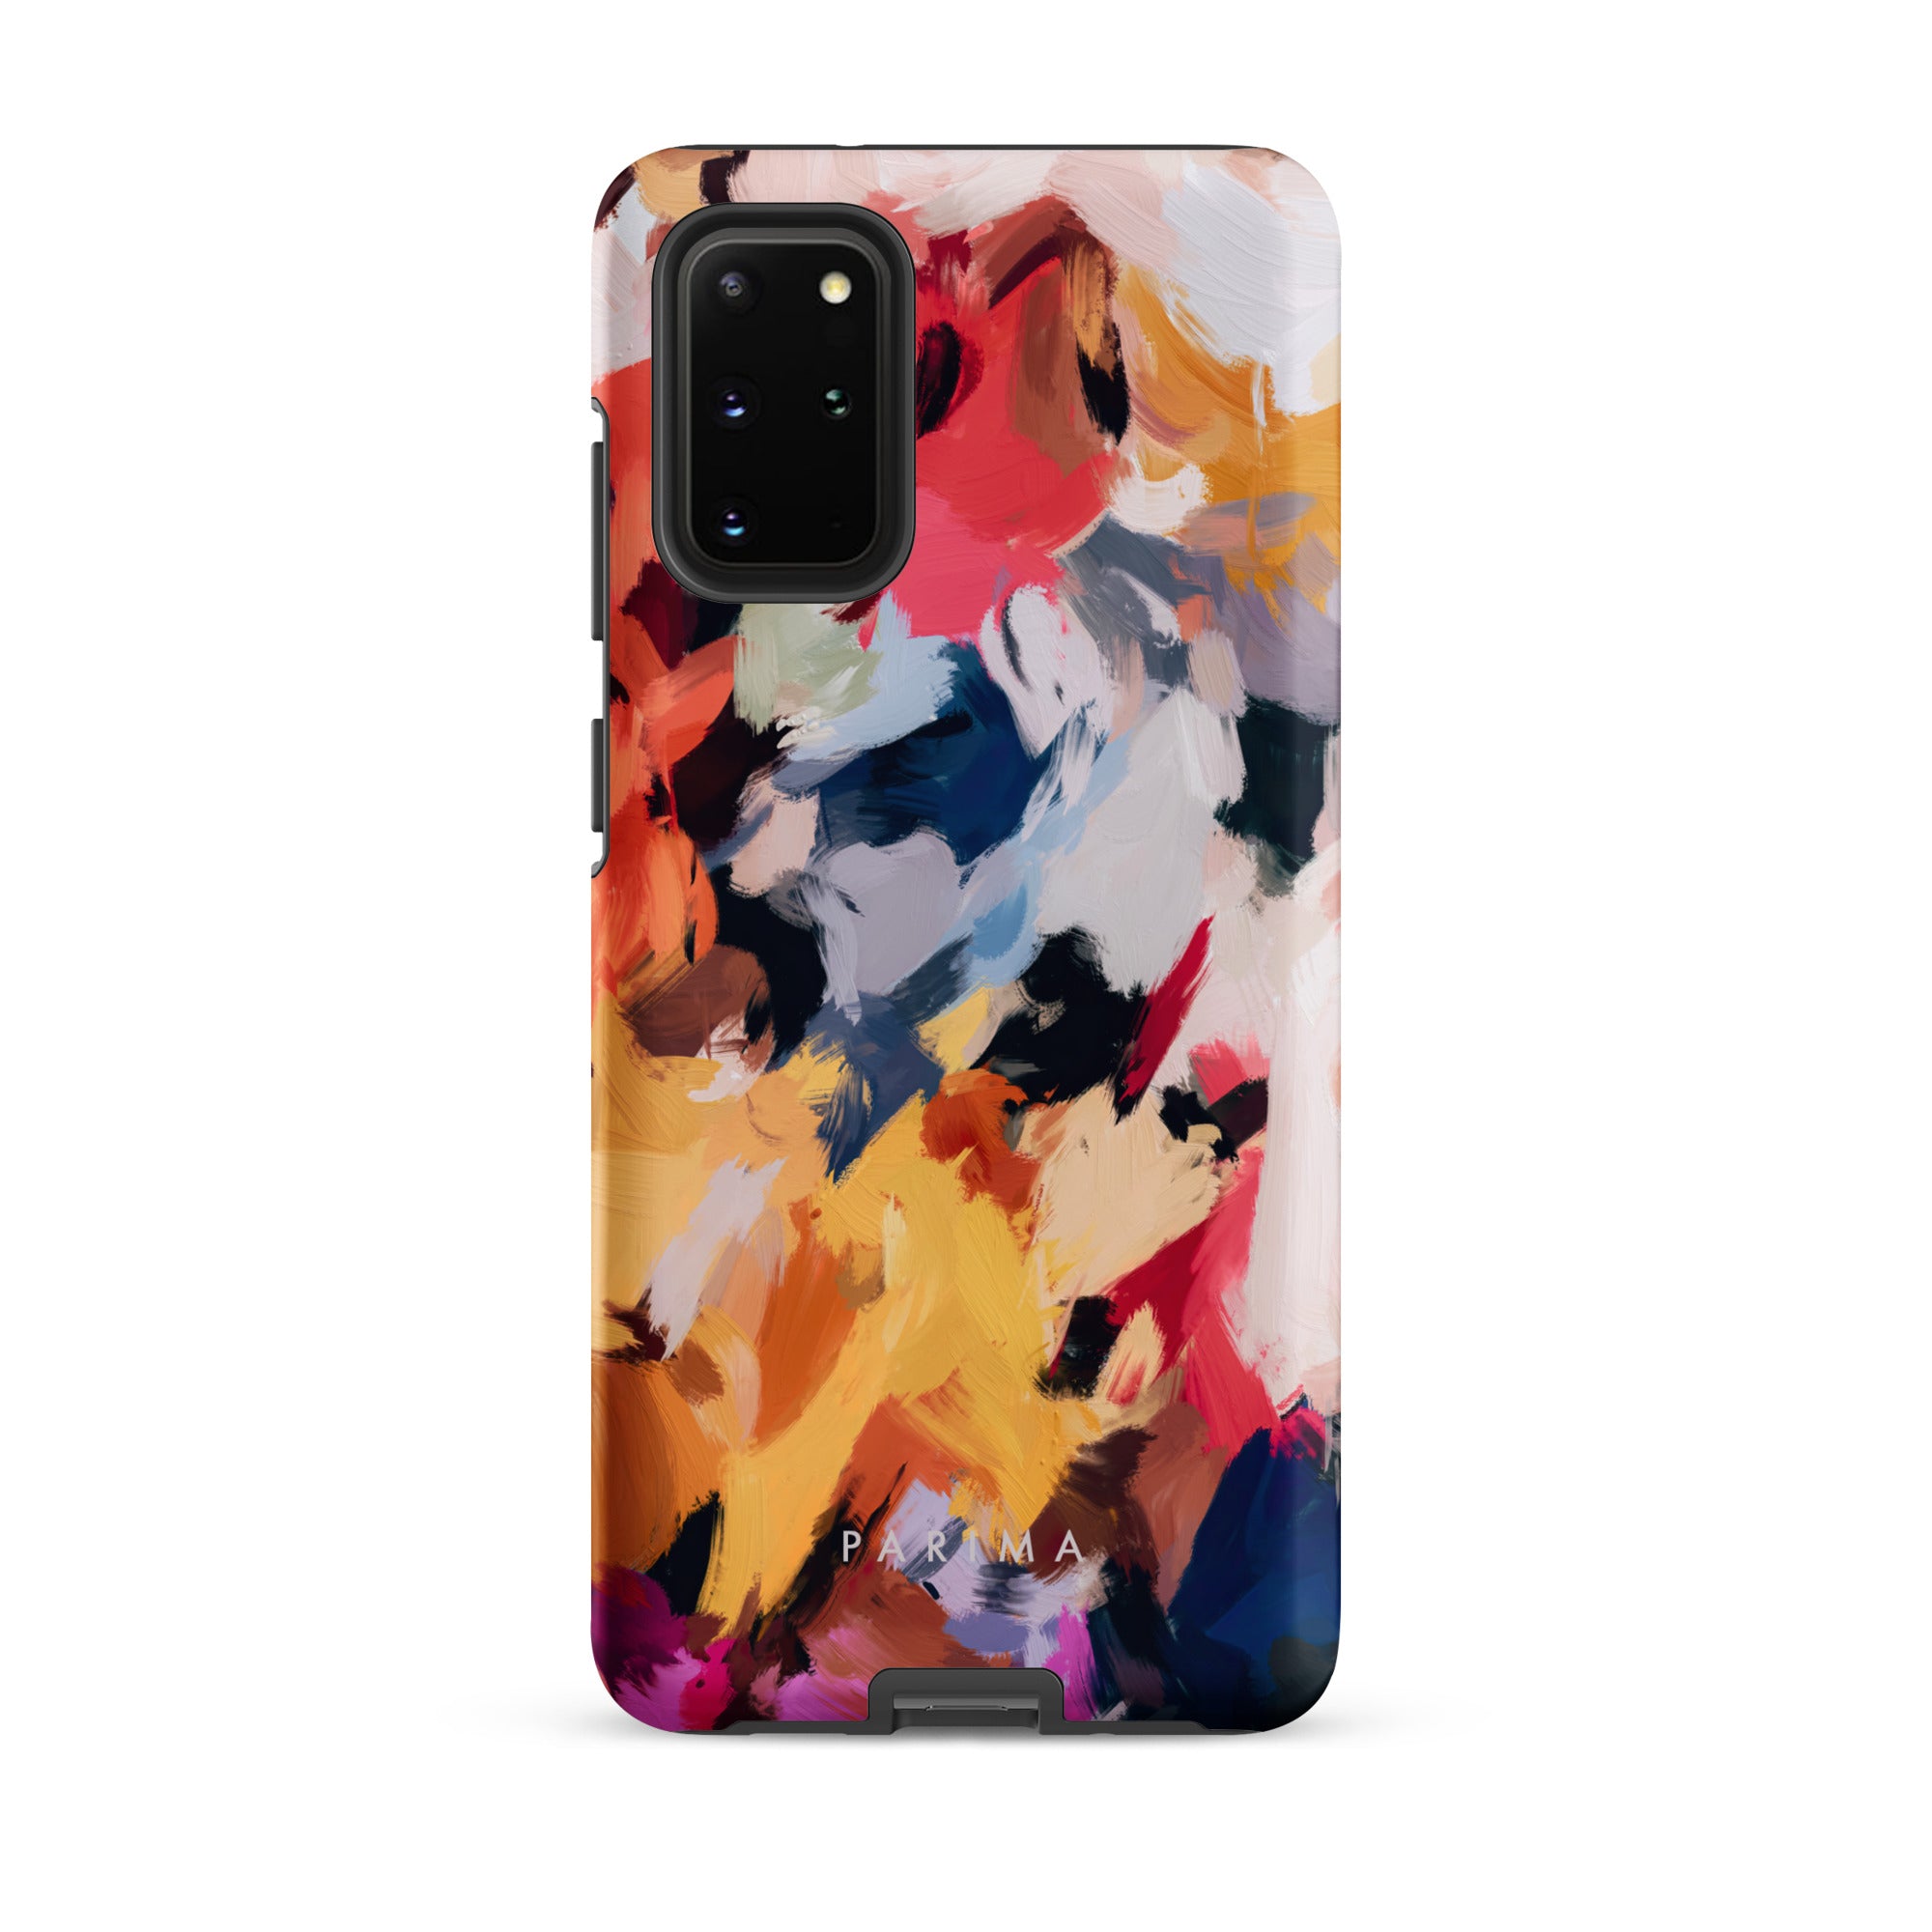 Wilde, blue and yellow multicolor abstract art on Samsung Galaxy S20 Plus tough case by Parima Studio